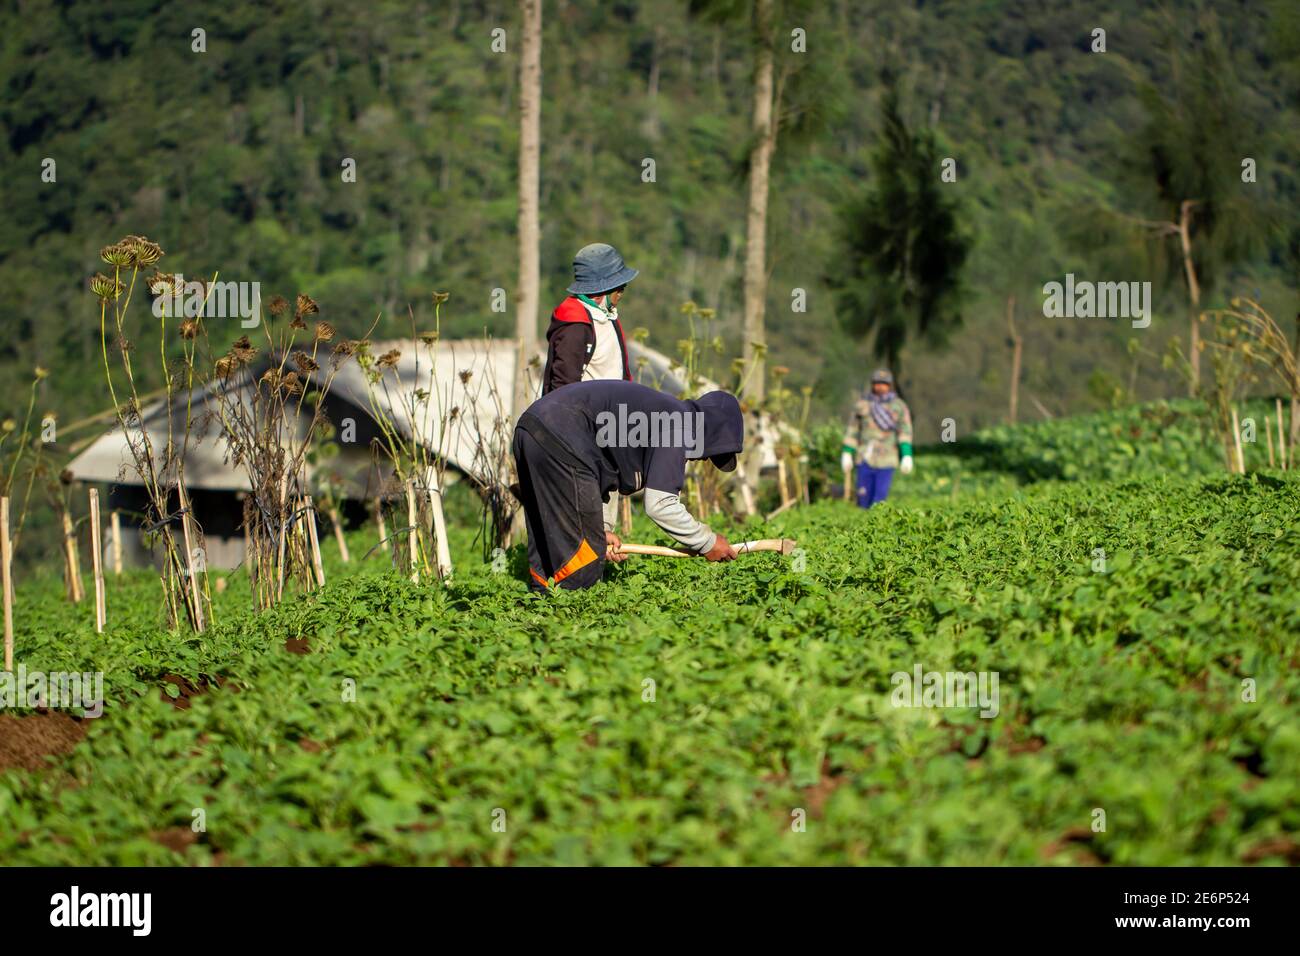 upland farmers are tending their gardens. vegetable gardening of mustard greens, cabbage and wortel in Brakseng Hill, Batu City. workers are hoeing th Stock Photo